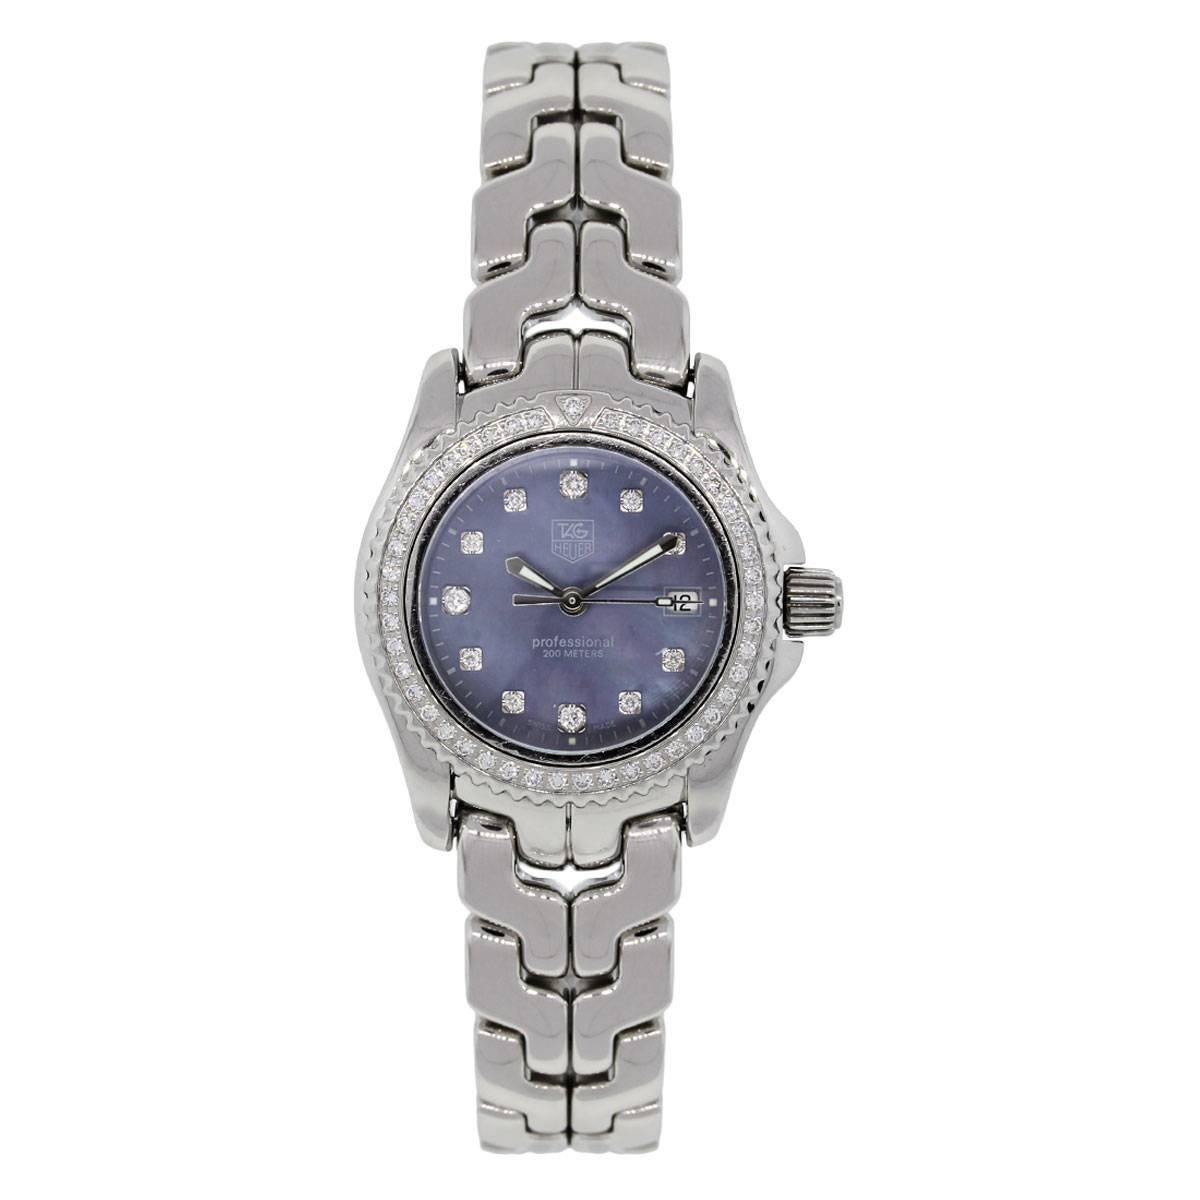 Brand: Tag Heuer
Style: Link
MPN: WT131F
Case Material: Stainless steel
Case Diameter: 31mm
Bezel: Unidirectional diamond bezel (factory)
Dial: Blue mother of pearl diamond dial (factory)
Bracelet: Stainless steel
Crystal: Sapphire
Size: